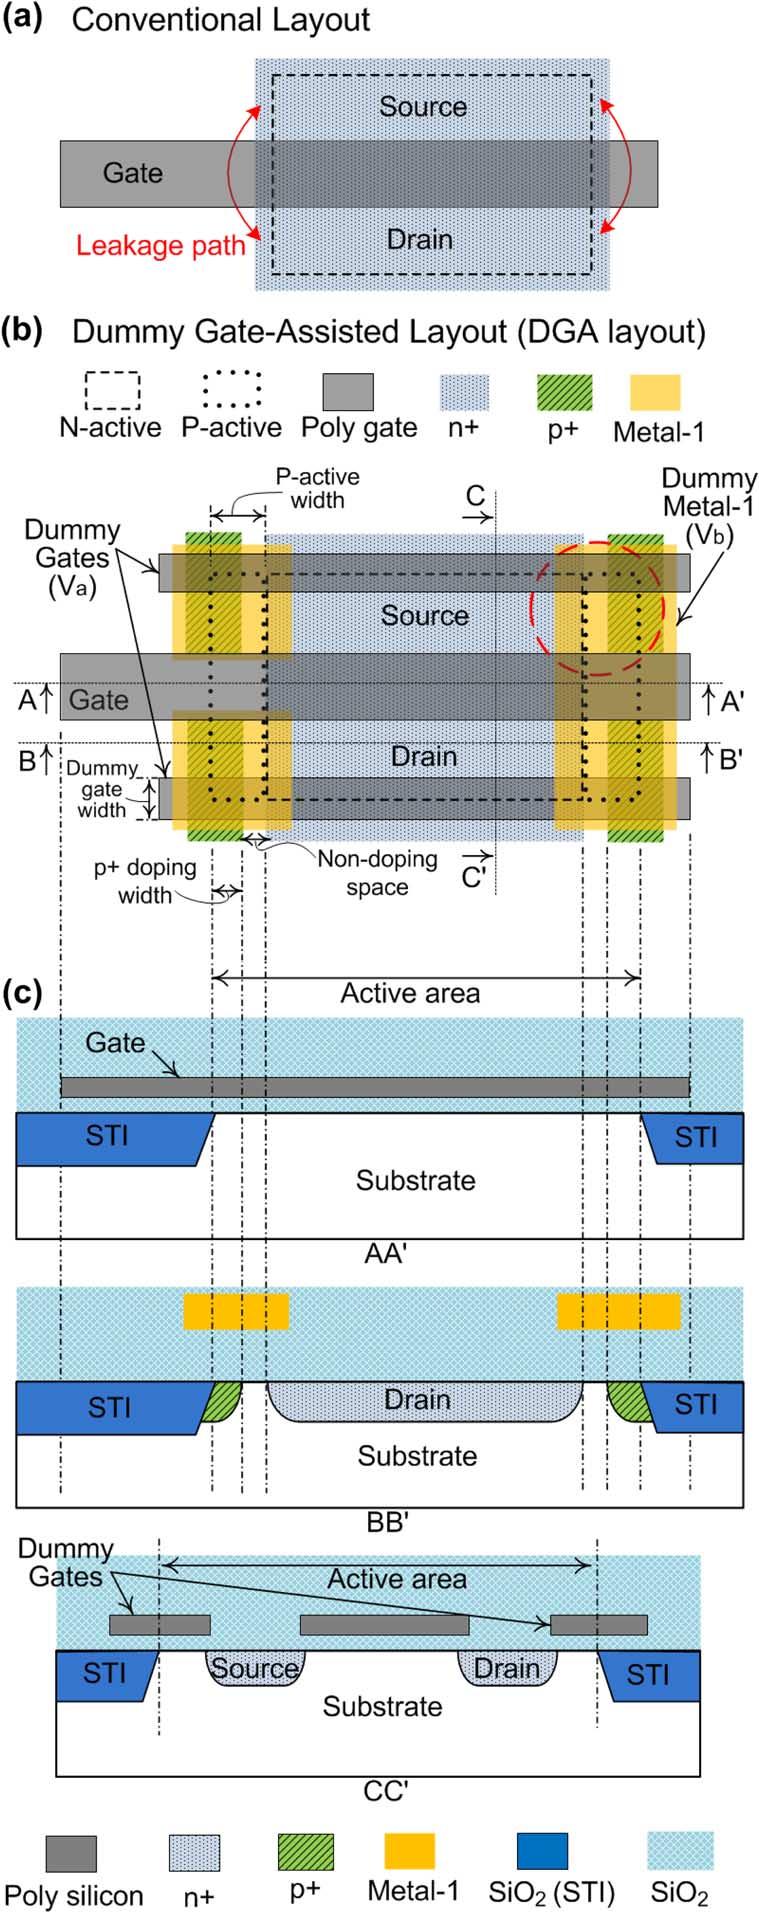 LEE AND LEE: DUMMY GATE-ASSISTED N-MOSFET LAYOUT FOR A RADIATION-TOLERANT INTEGRATED CIRCUIT 3085 [11] [13]. However, the use of the ELT requires trade-offs.